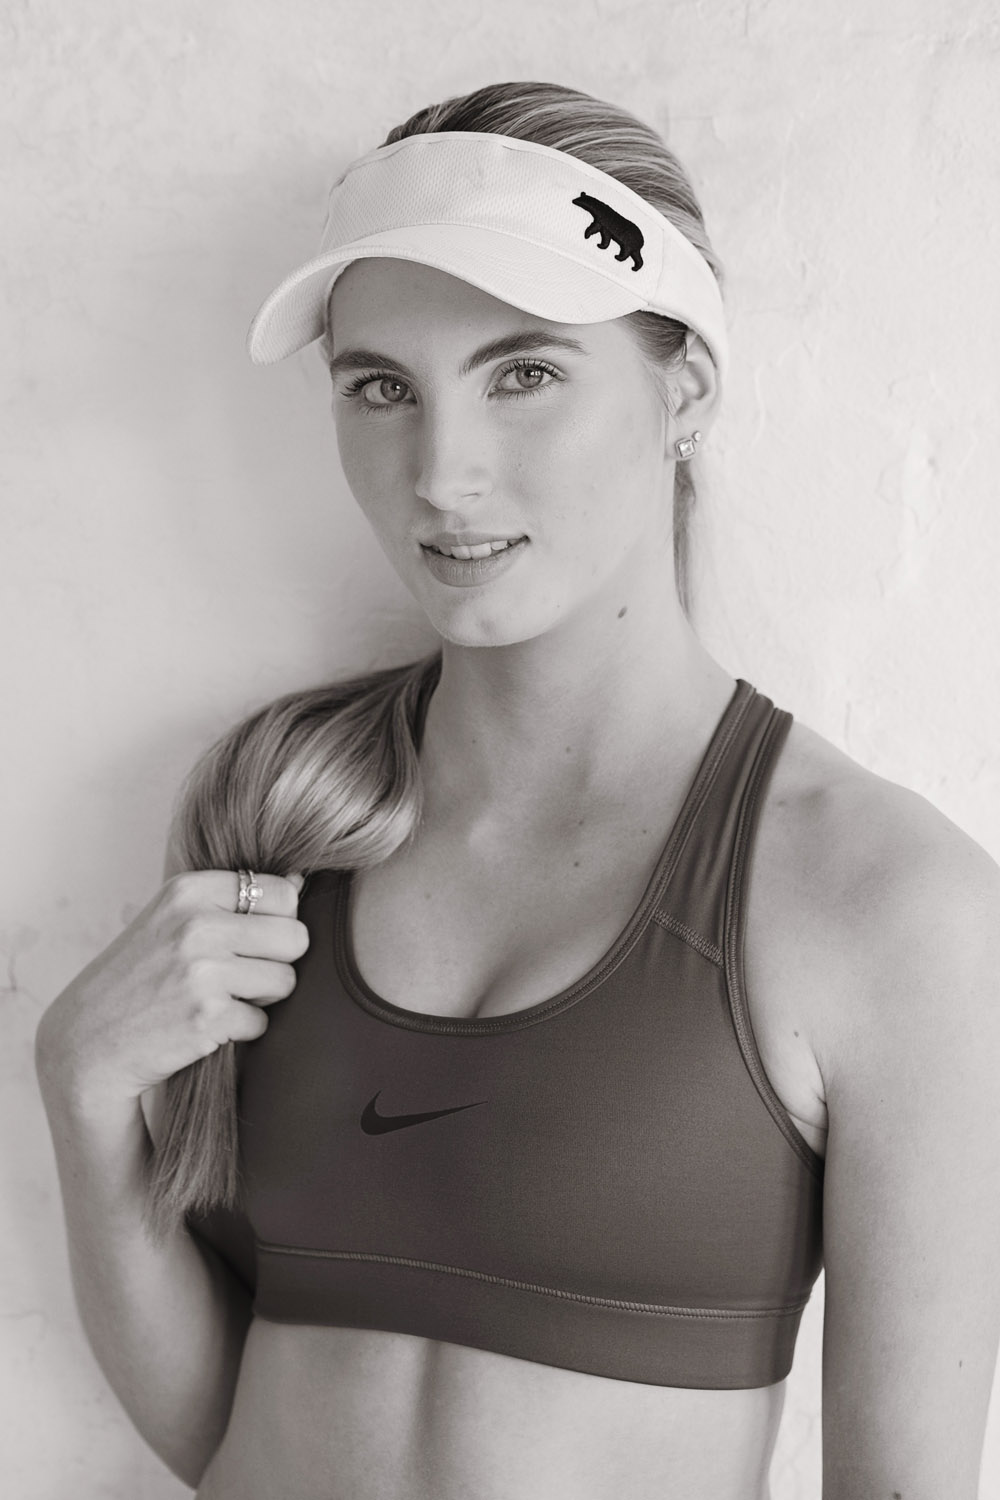 Active sports mid headshot. Modelling Portfolio headshots for Fashion, Fitness, Beauty for womwn and men.